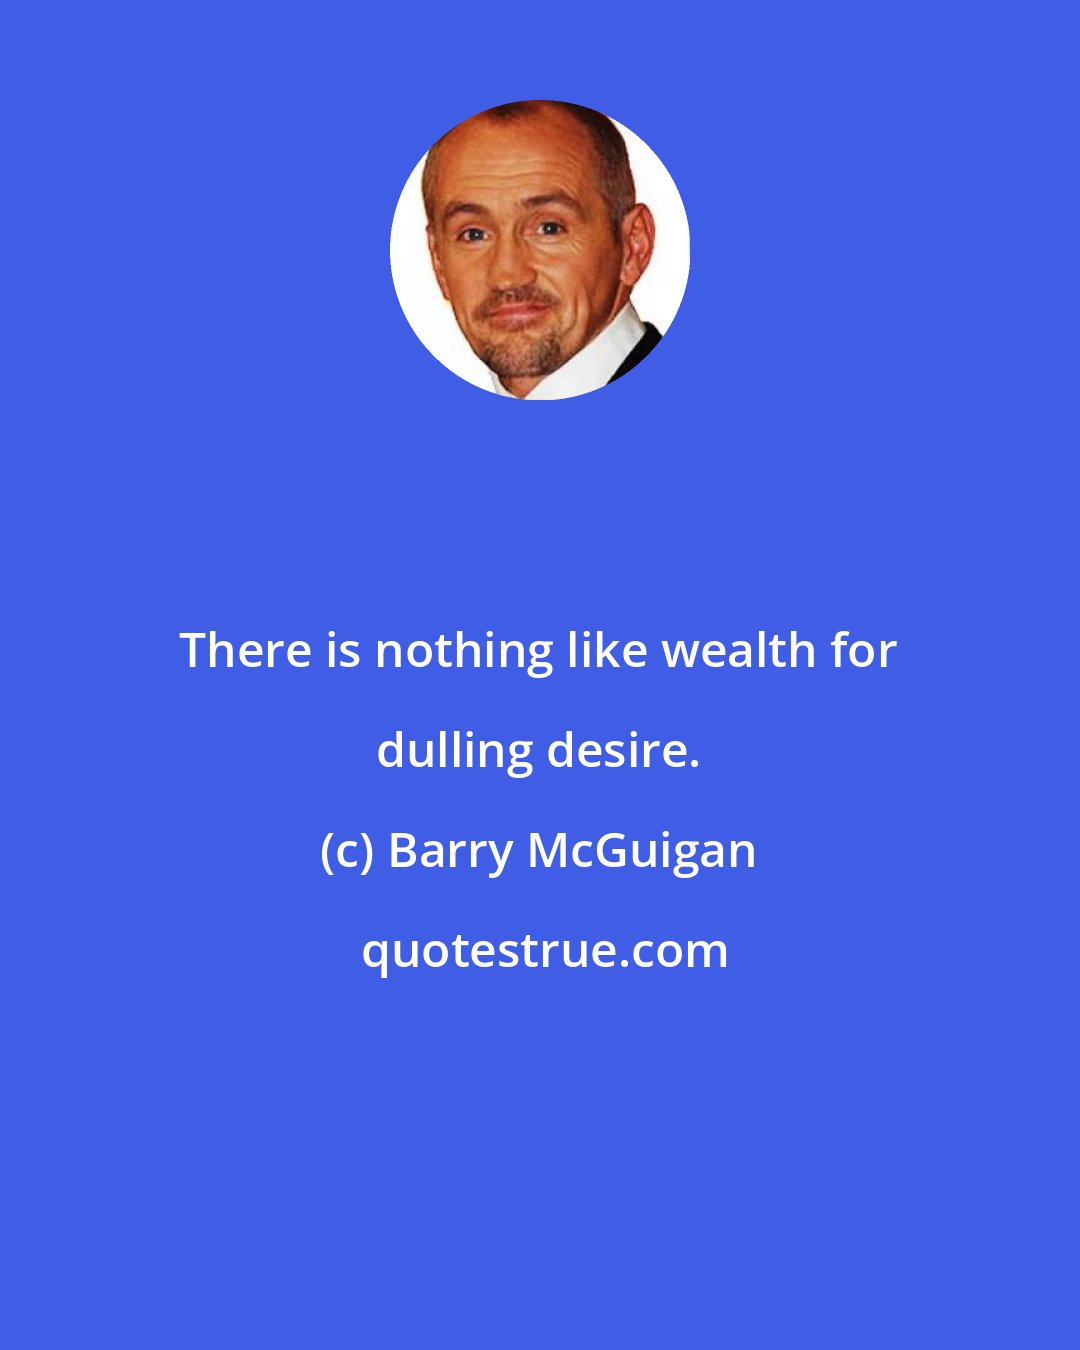 Barry McGuigan: There is nothing like wealth for dulling desire.